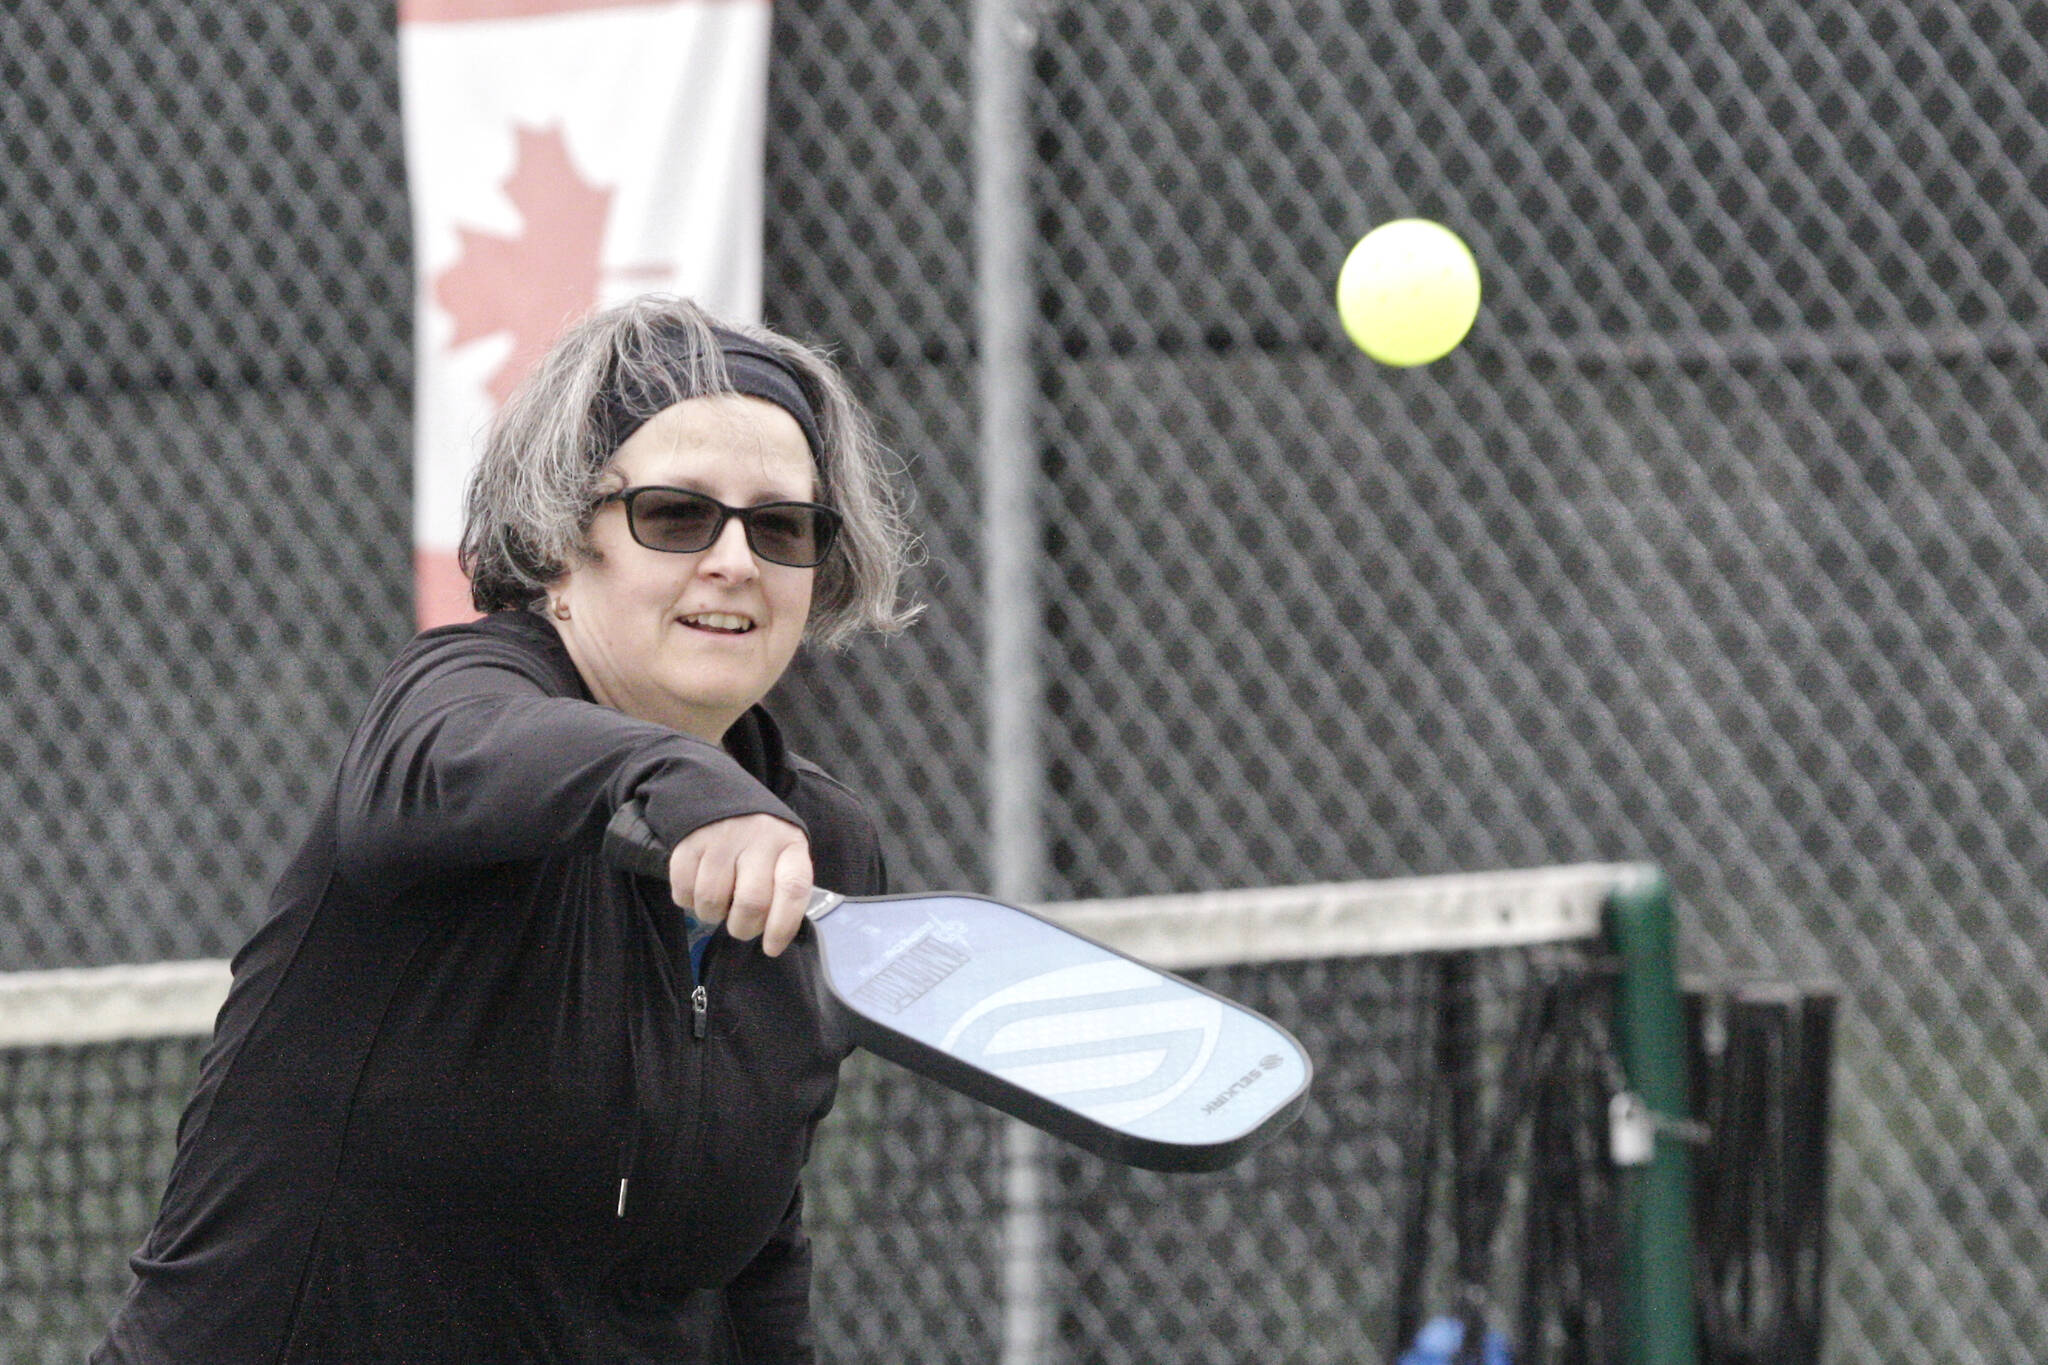 A Douglas Park group pickleball player returns a serve. The group has grown to 220 members, part of the fastest-growing sports in Canada, with an estimated 1 million Canadians who play at least once a month. (Dan Ferguson/Langley Advance Times)